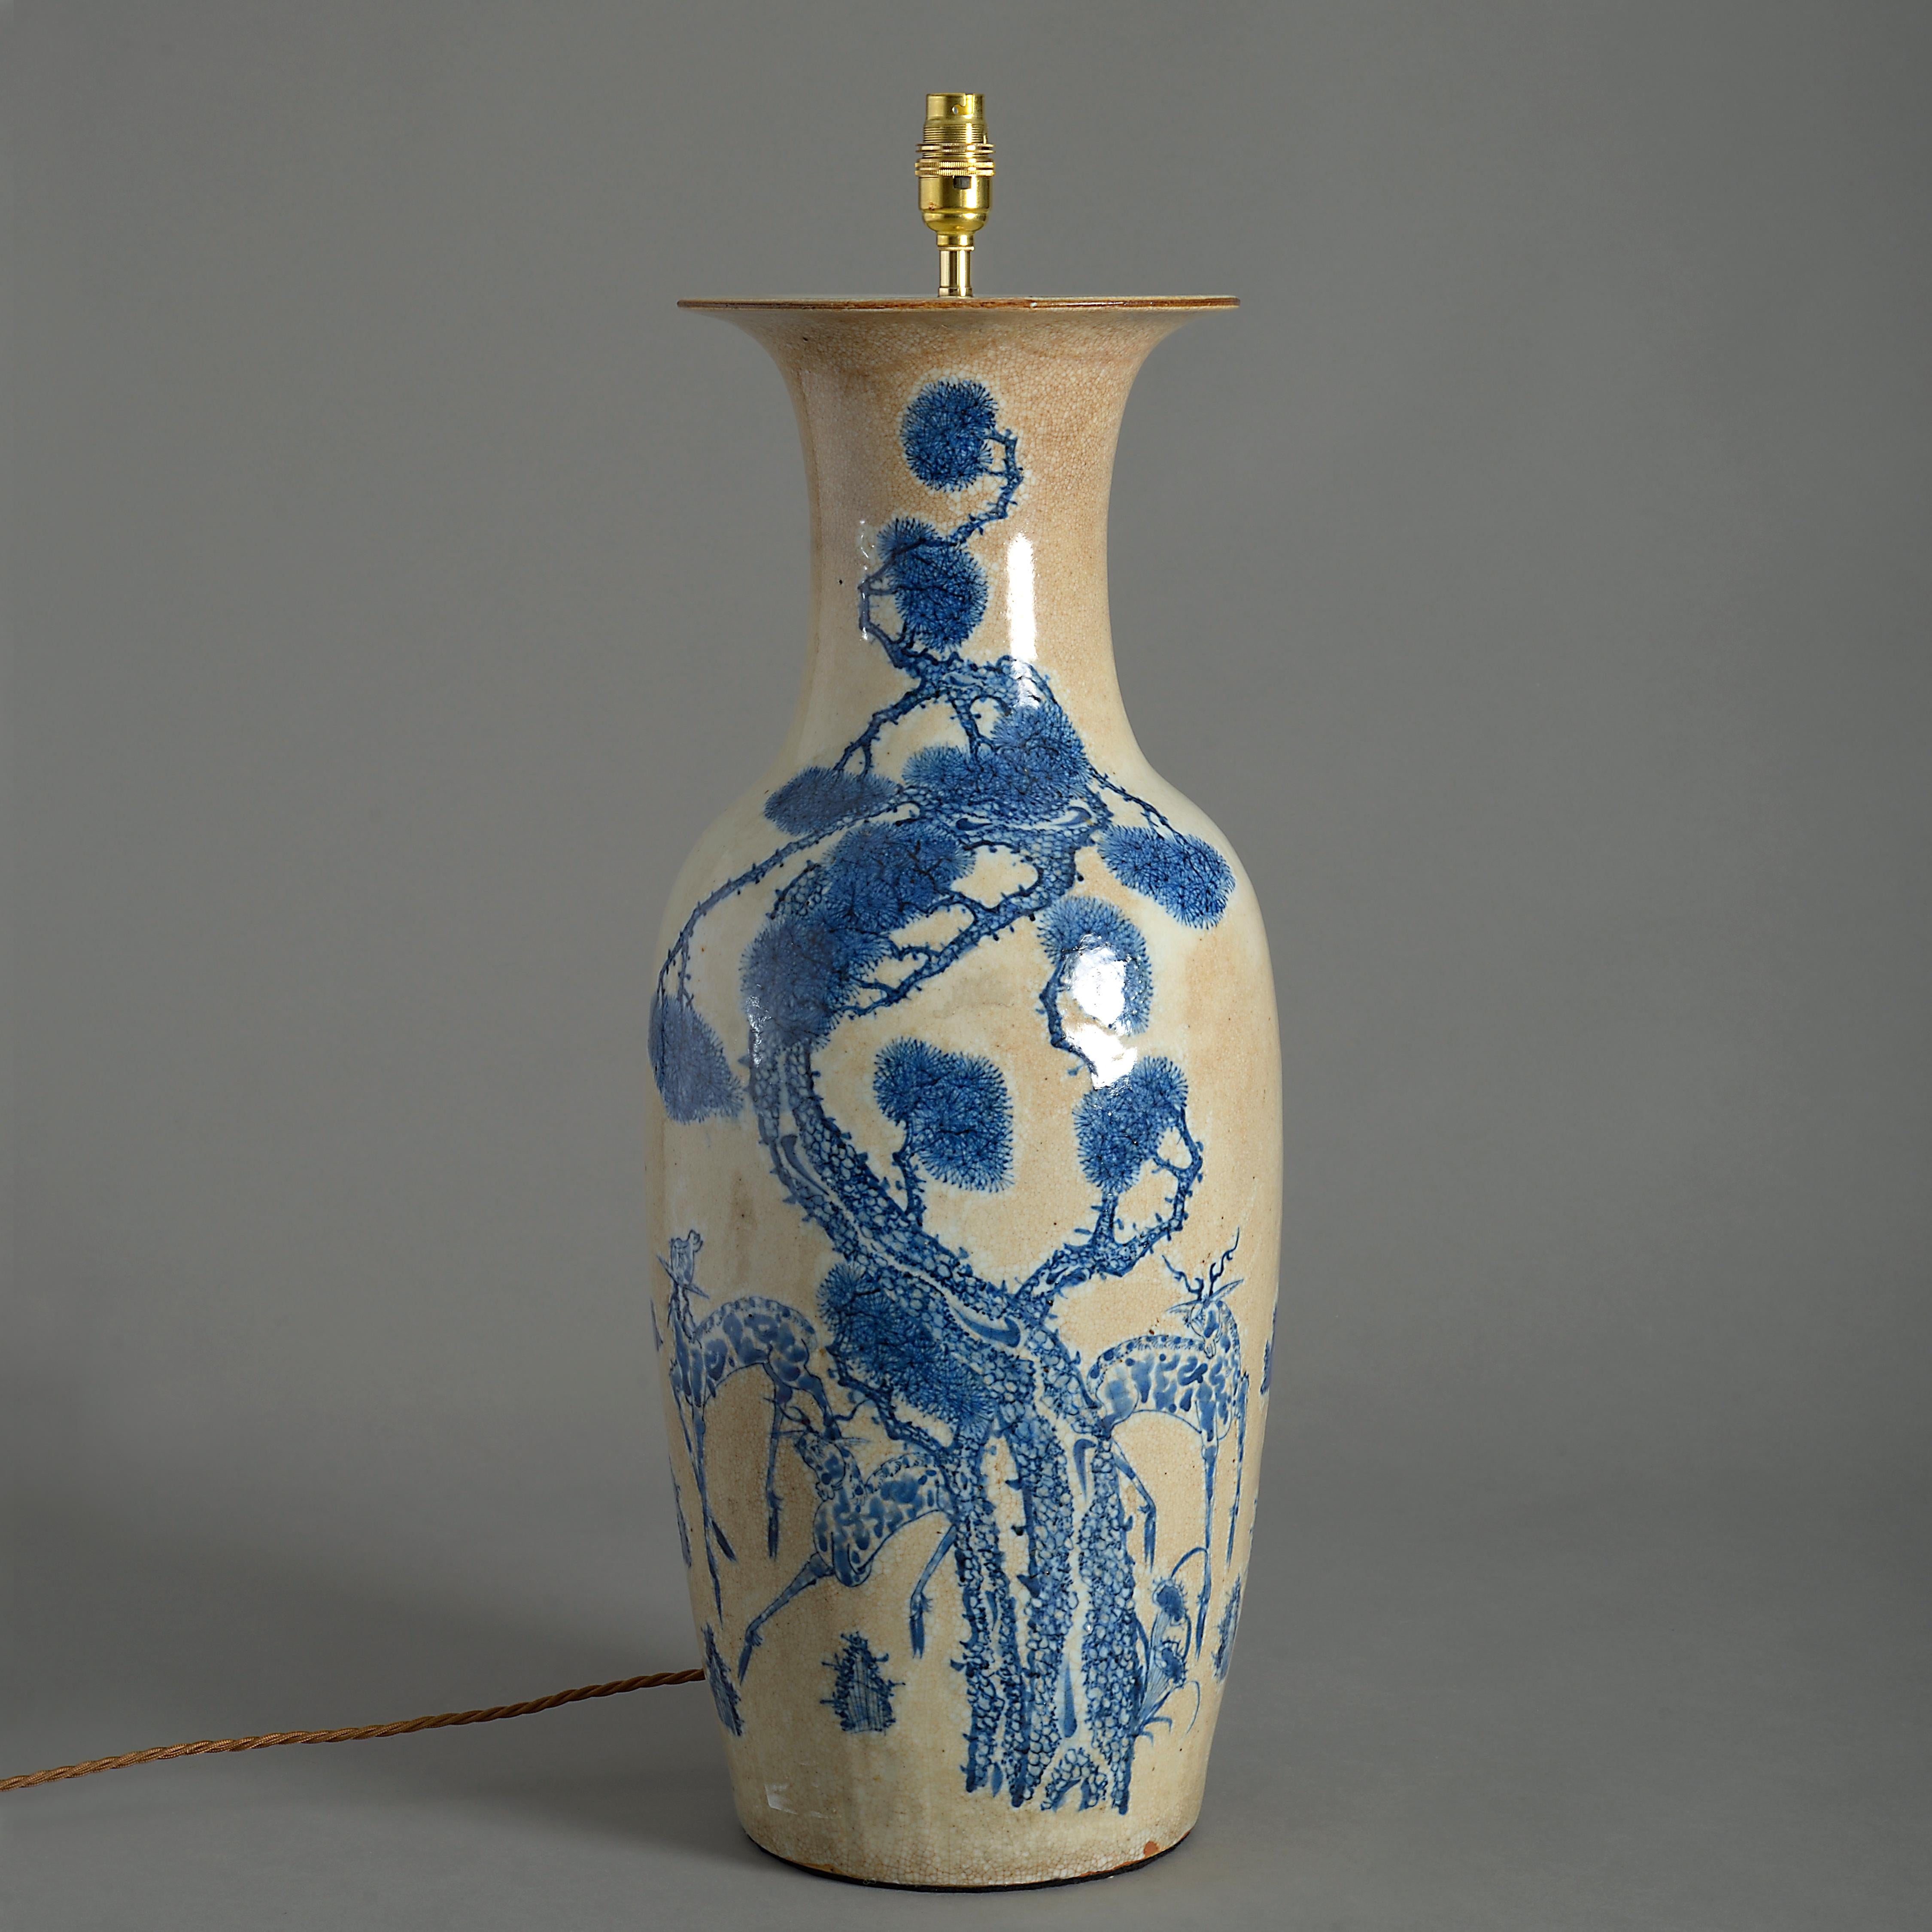 A tall mid-19th century crackle glazed porcelain baluster vase, with blue and café au lait decoration.

Late Qing dynasty

Dimensions refer to vase excluding shade and electrical components.